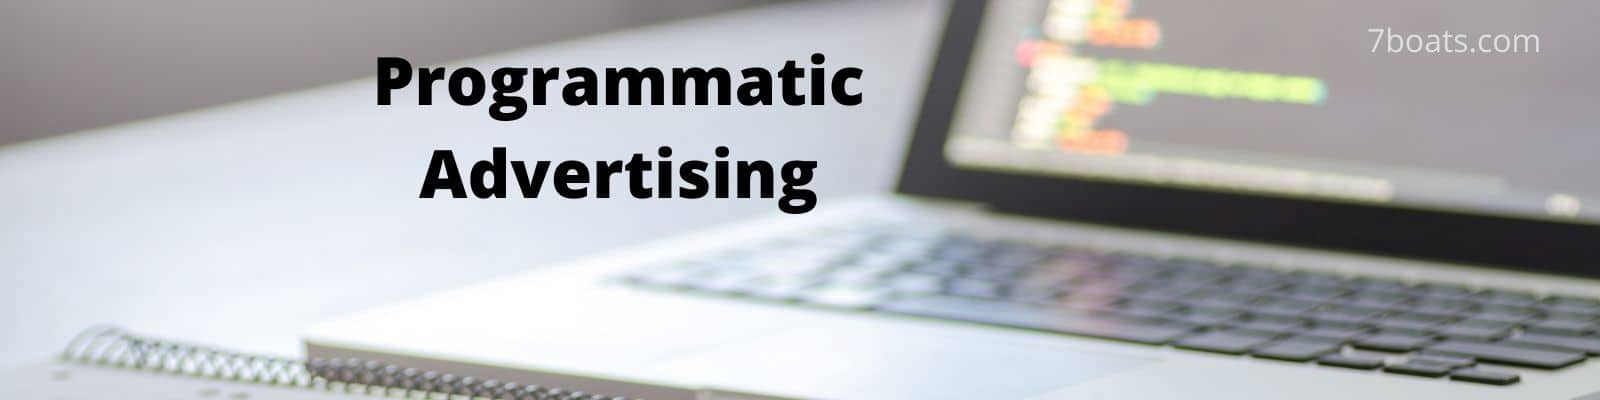 What is Programmatic Advertising? – A Beginner’s Guide to Programmatic Advertising.